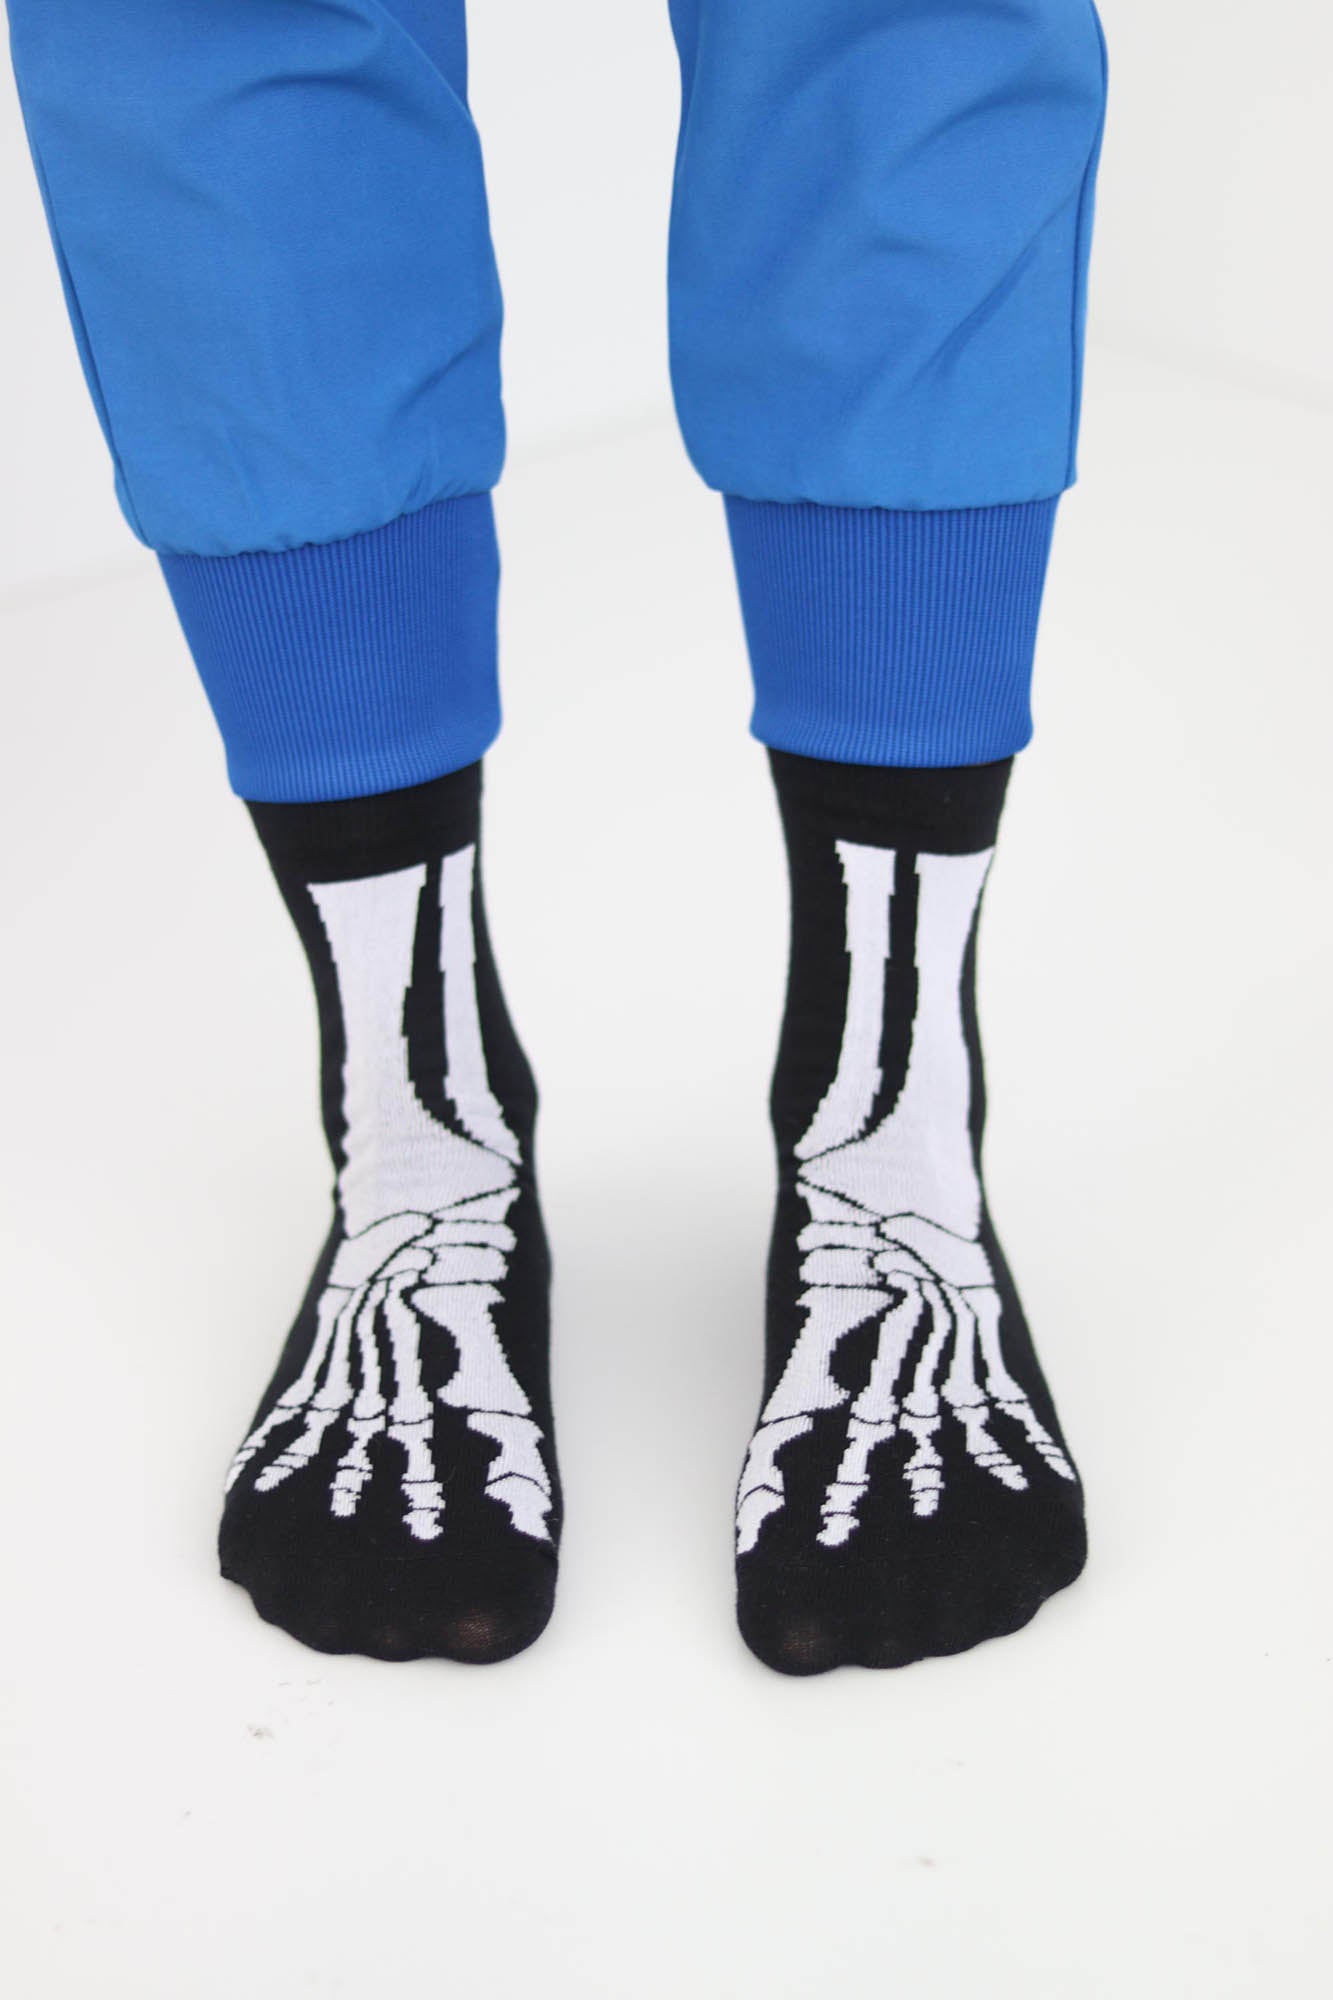 Skelton printed socks perfect for radiologists and Xray technicians